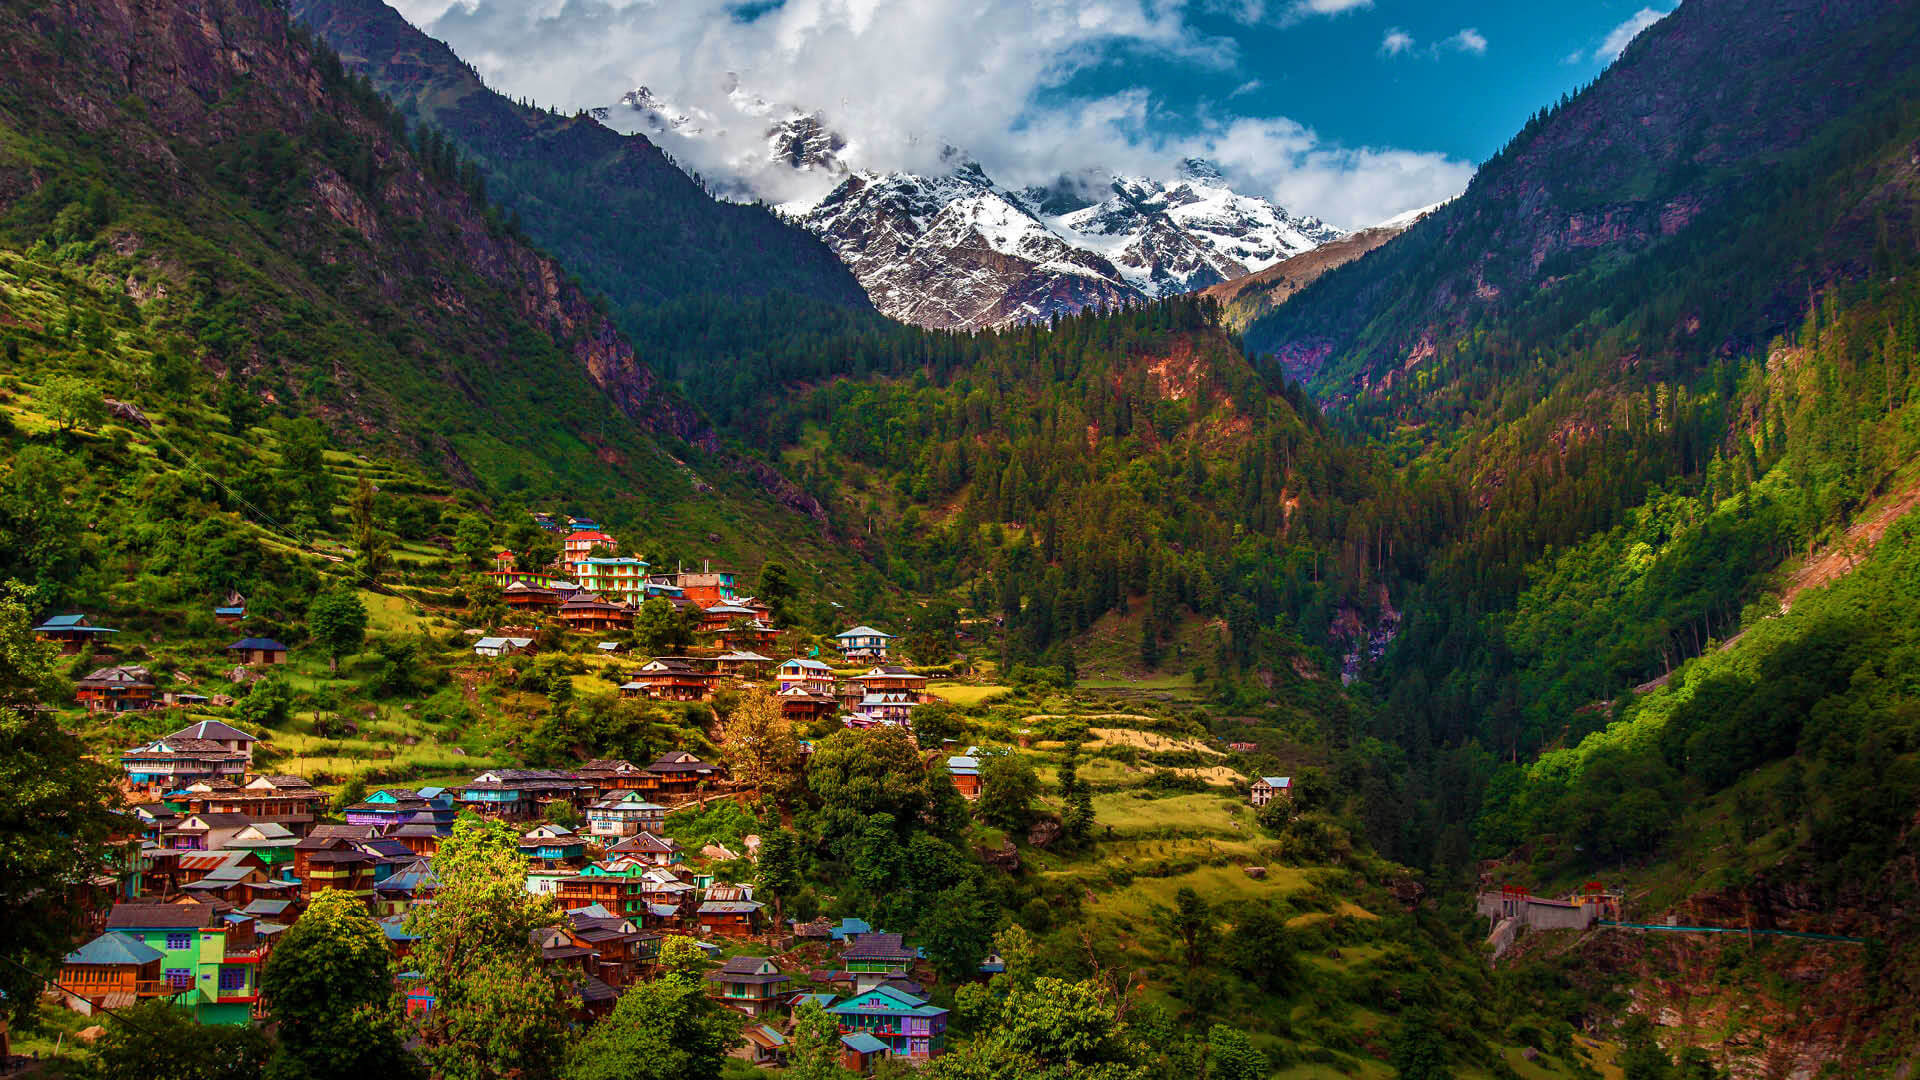 Tosh Himachal Pradesh: How To Reach & Places To Visit